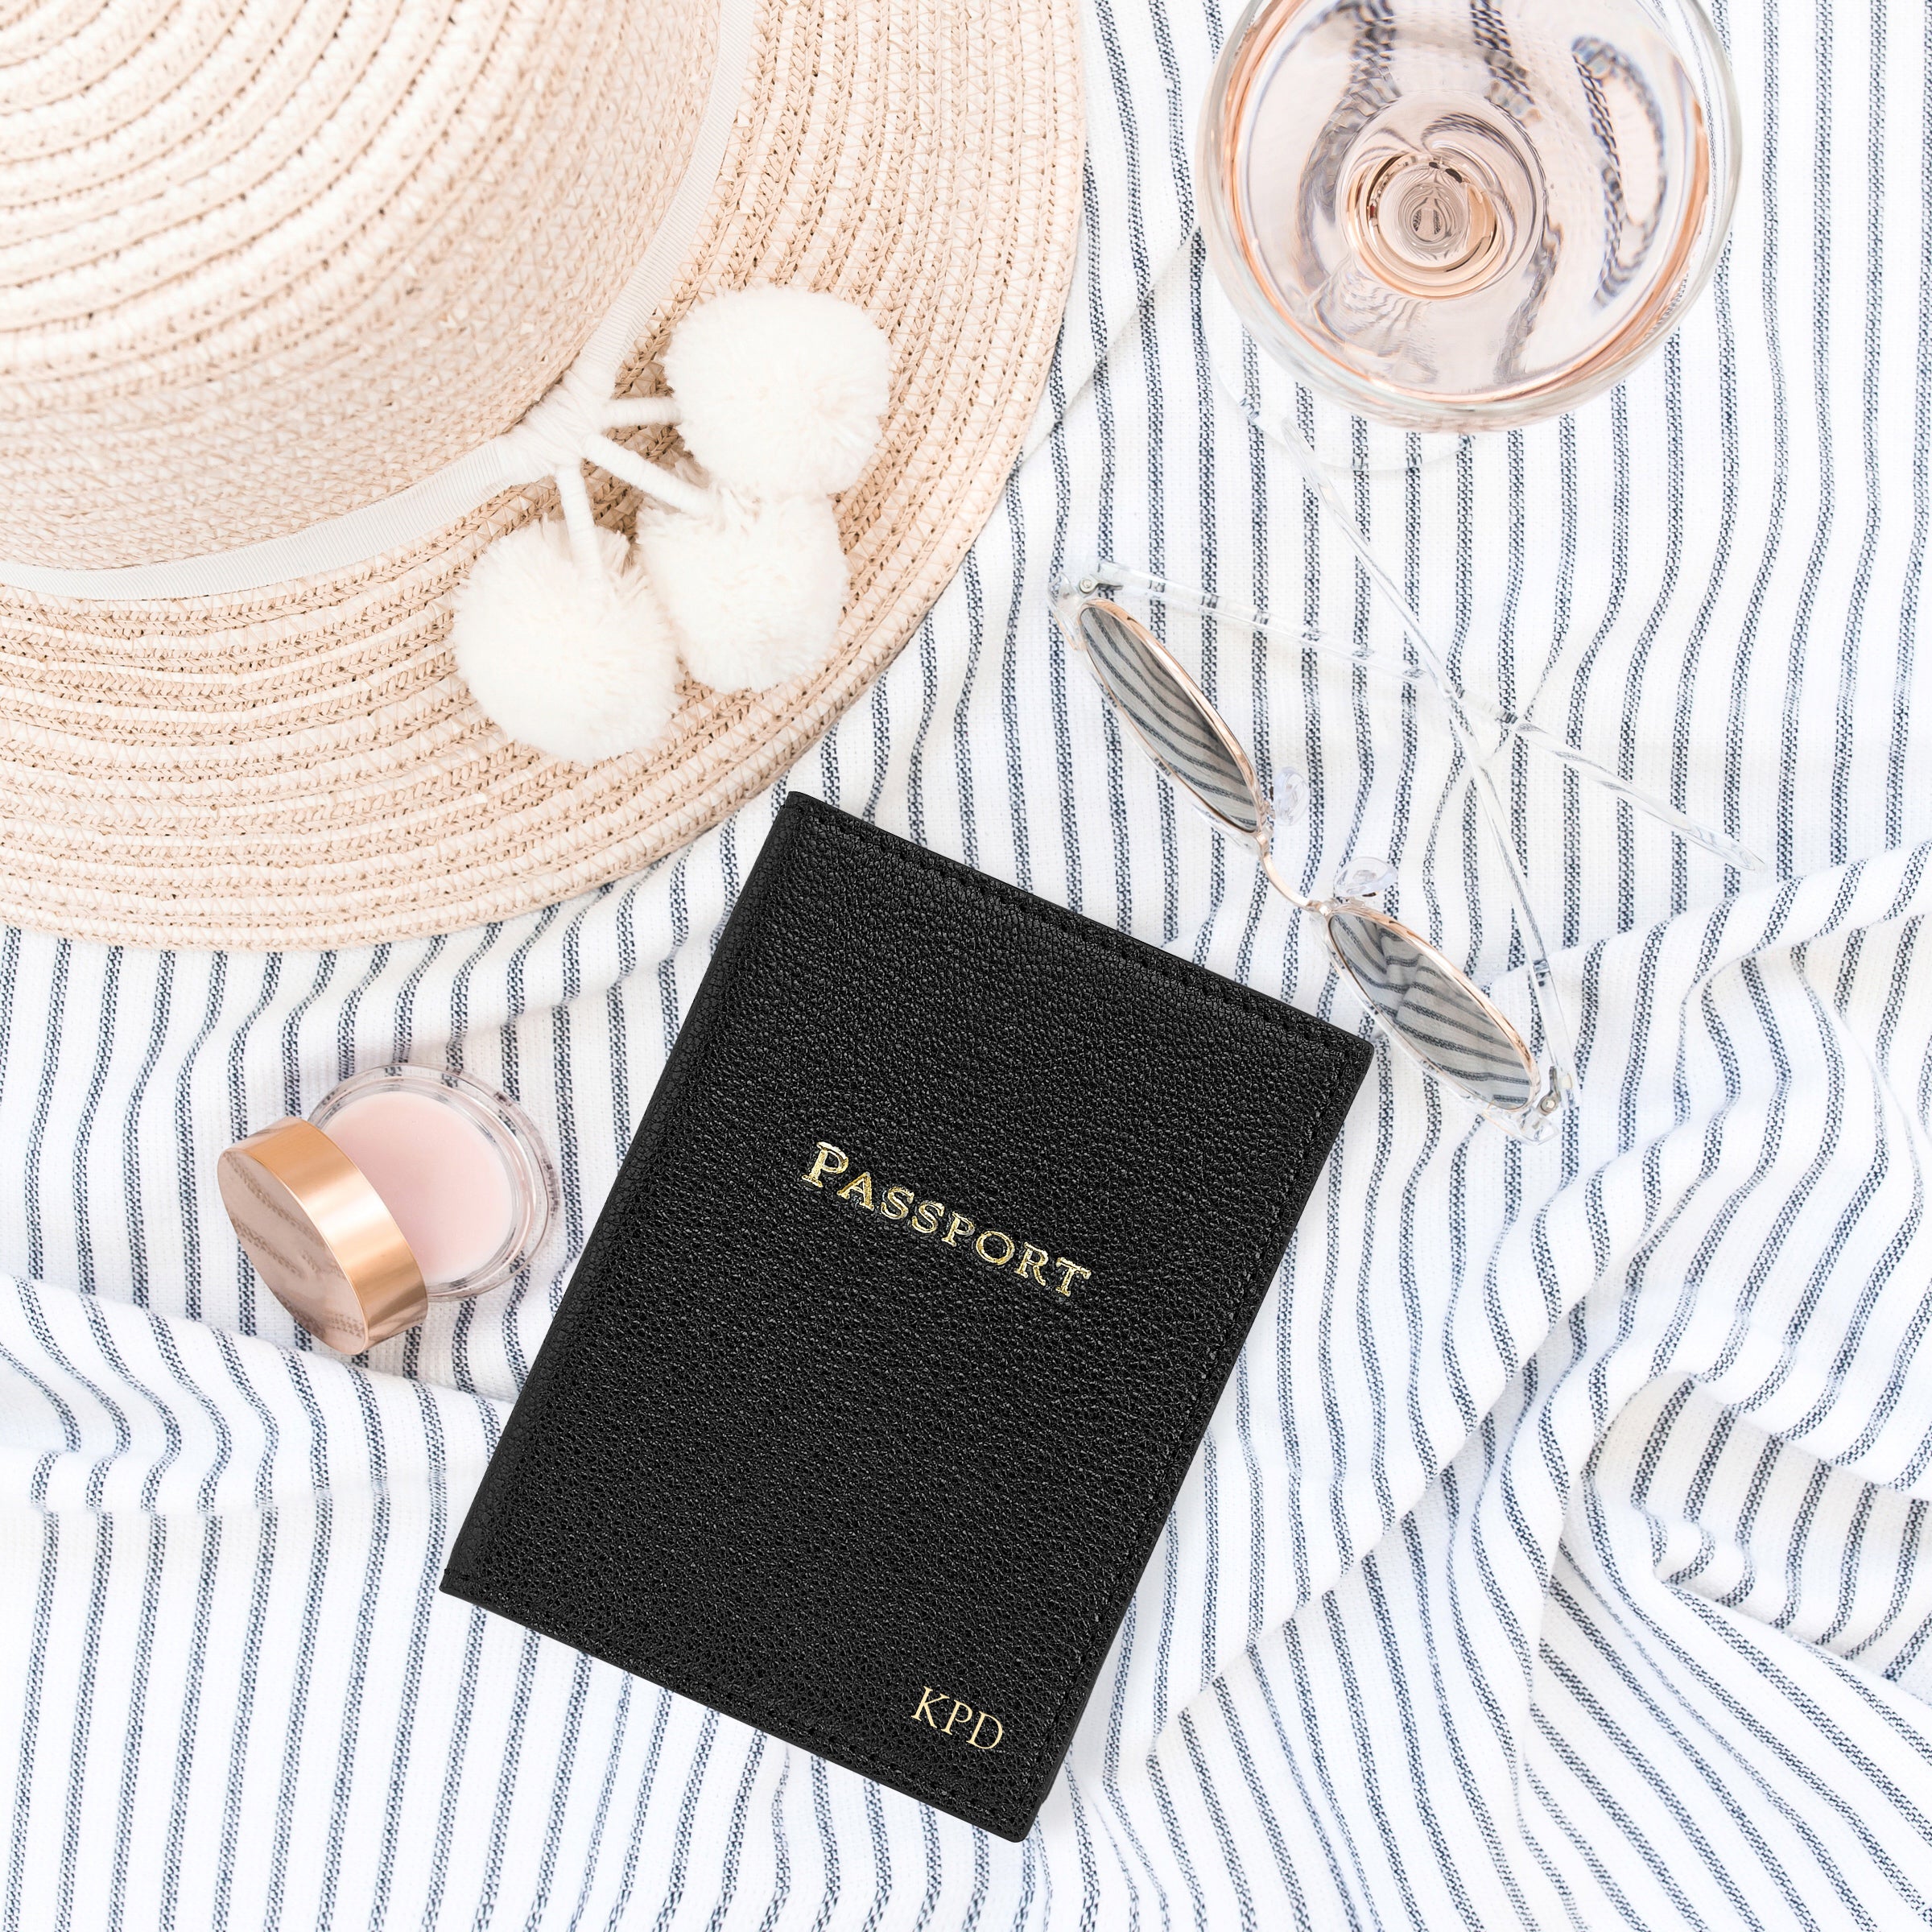 Spring Break is officially here!  Thankfully, Davis Designs has mastered what’s essential to making everything fit in your luggage. Pack the best must-haves and travel like a pro.